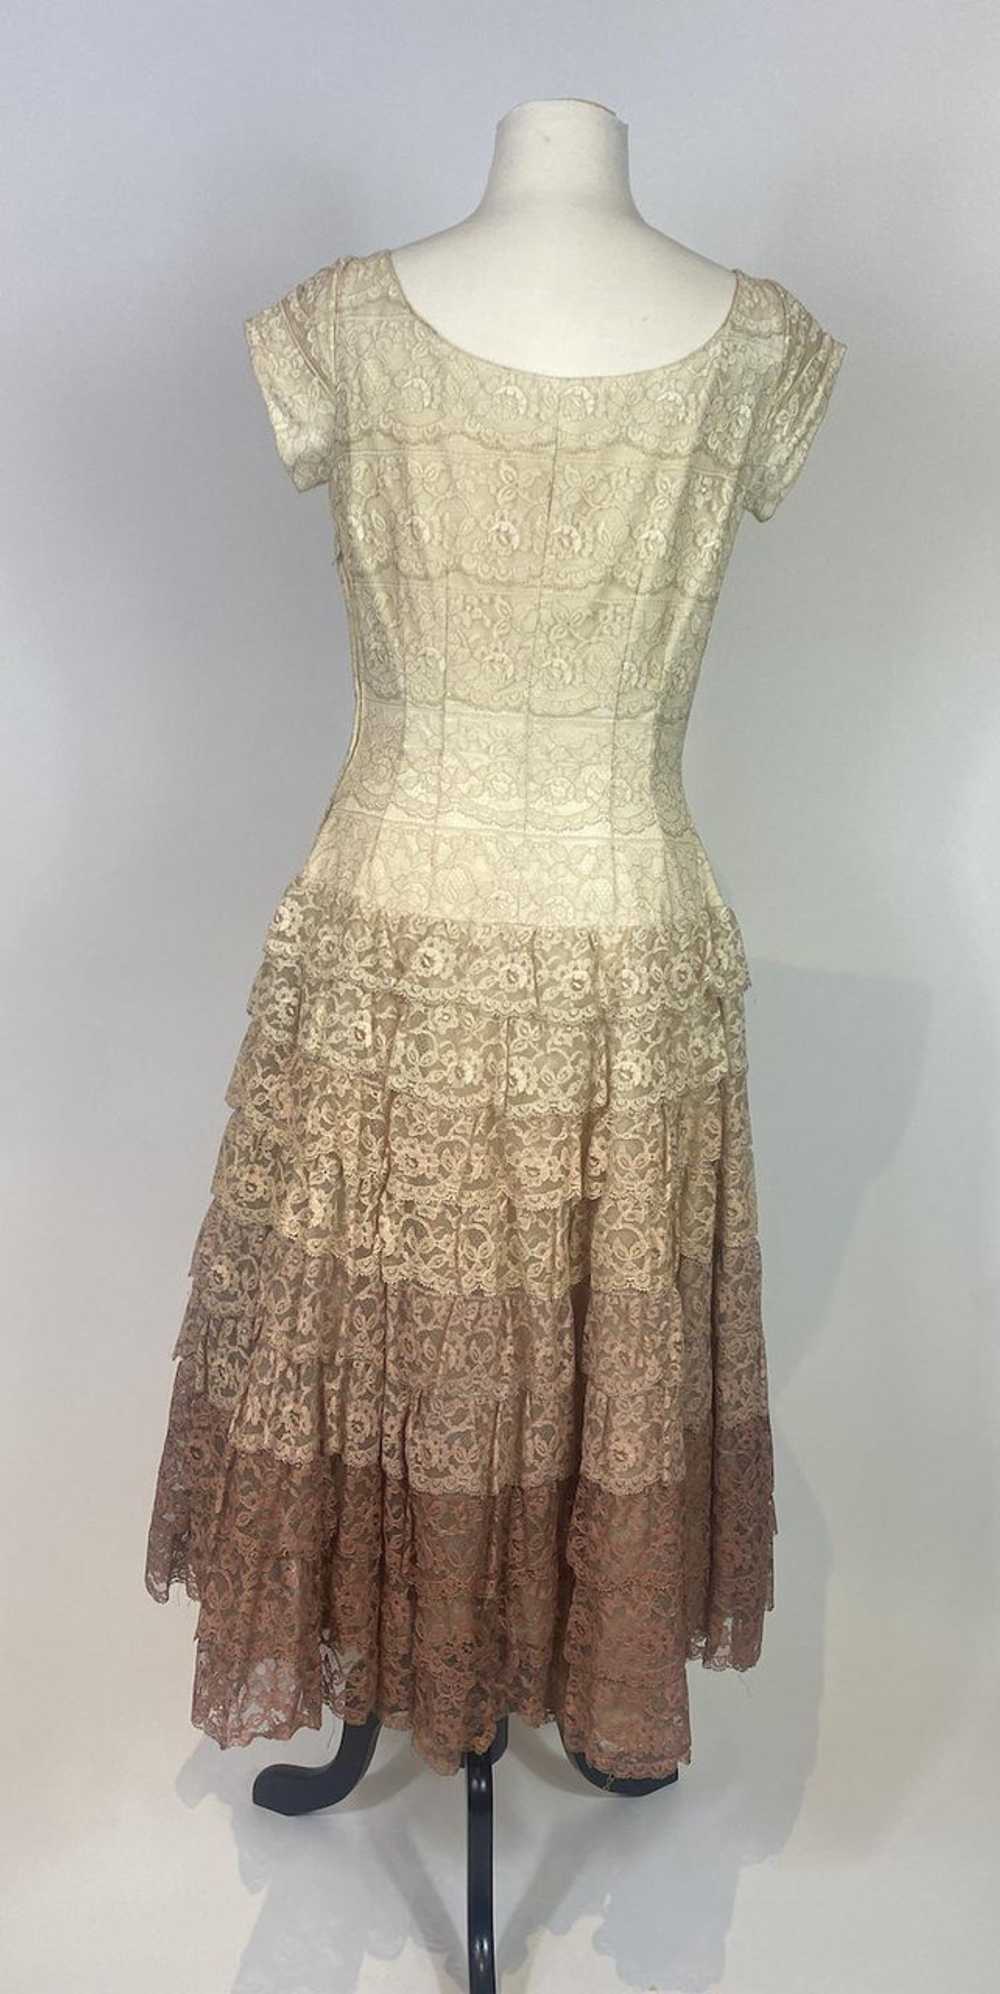 1950s Tiered Ombre Lace Swing Dress - image 6